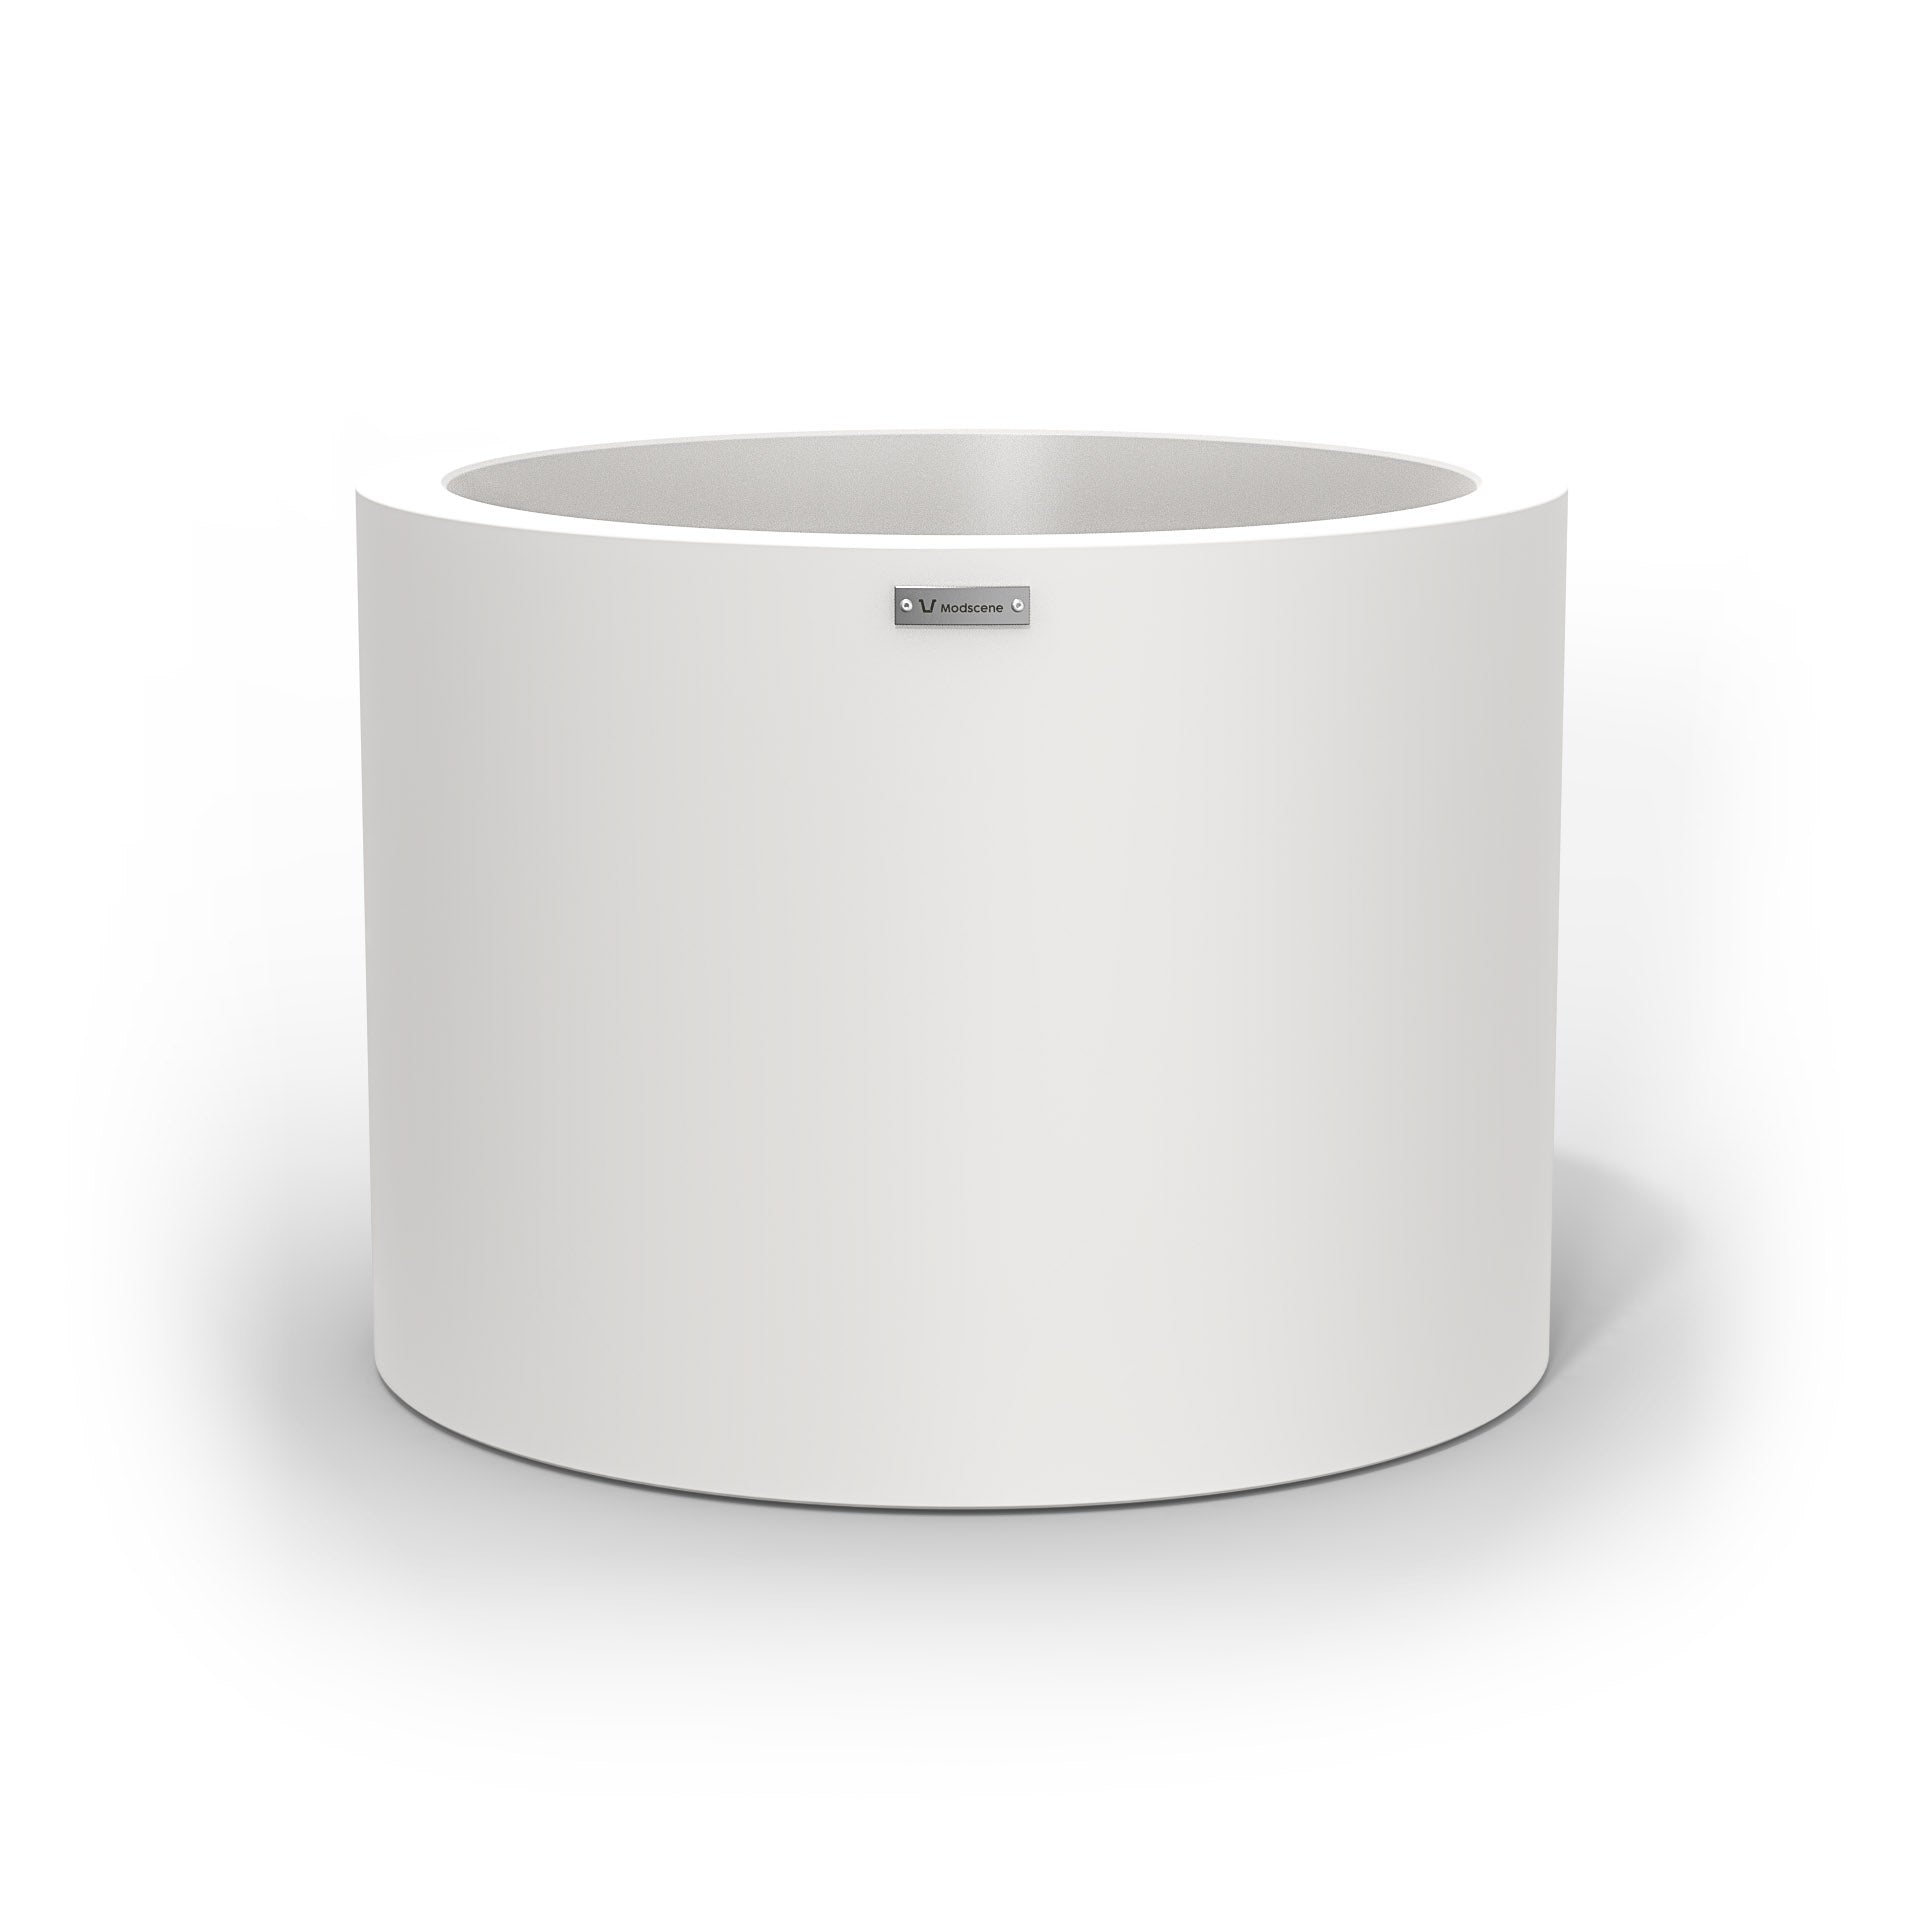 A cylinder shaped pot planter in white made by Modscene NZ. 